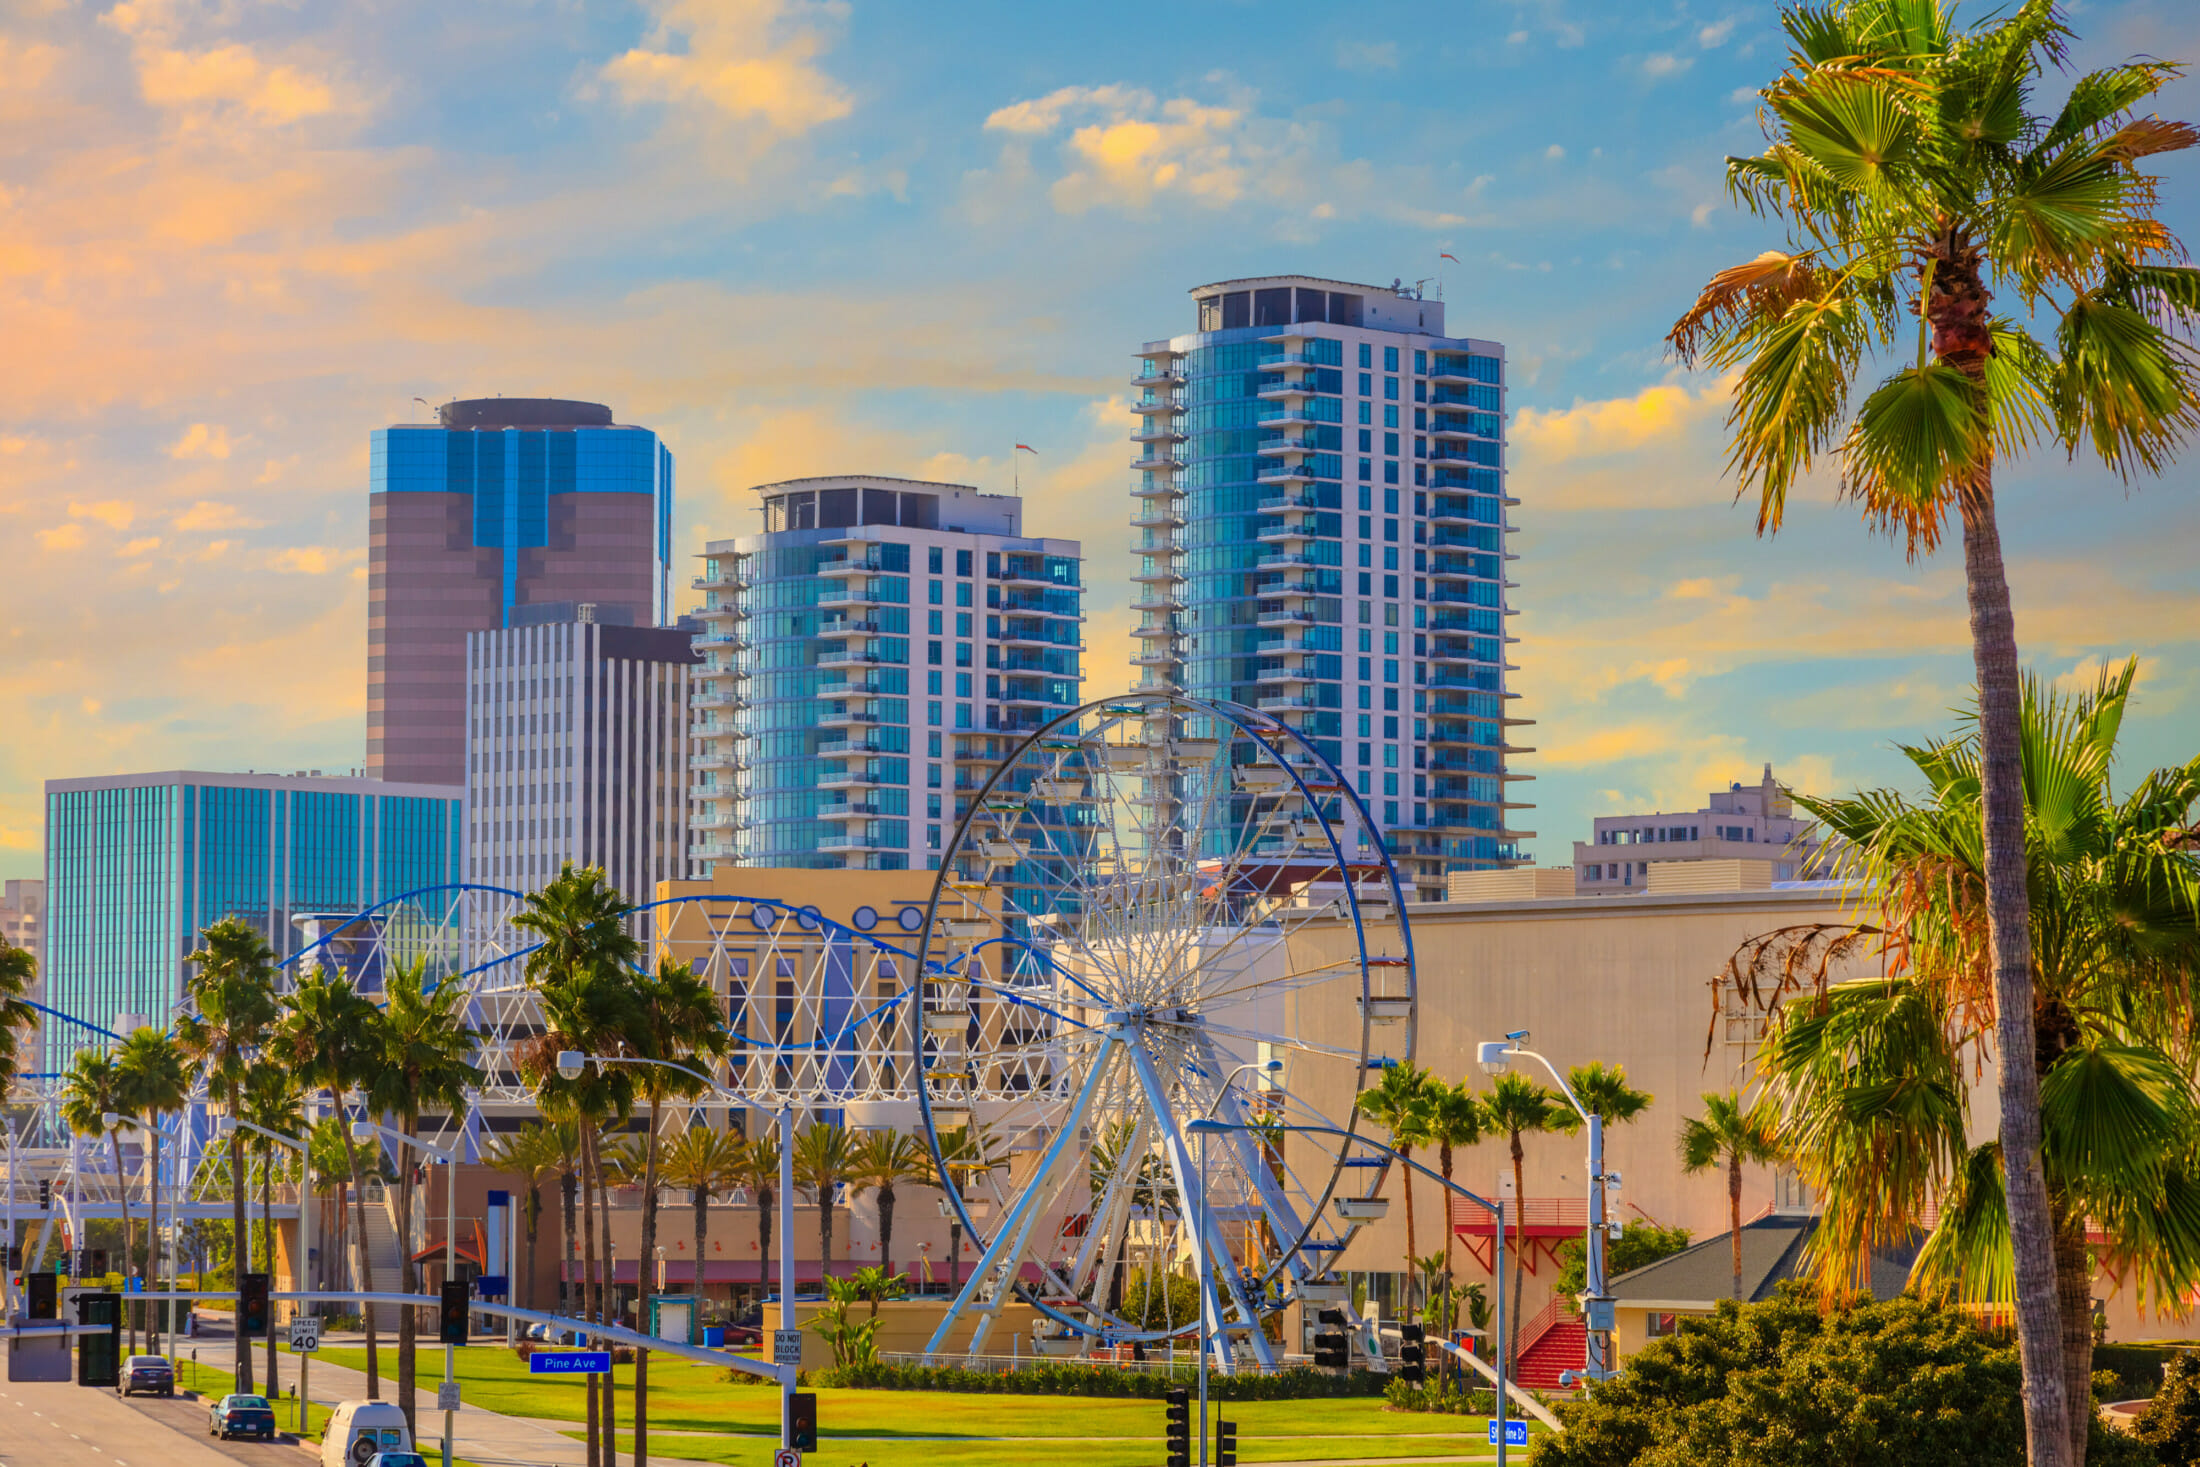 Long Beach, California | 50 Up-and-Coming Real Estate Markets to Watch in 2019 | Buildium